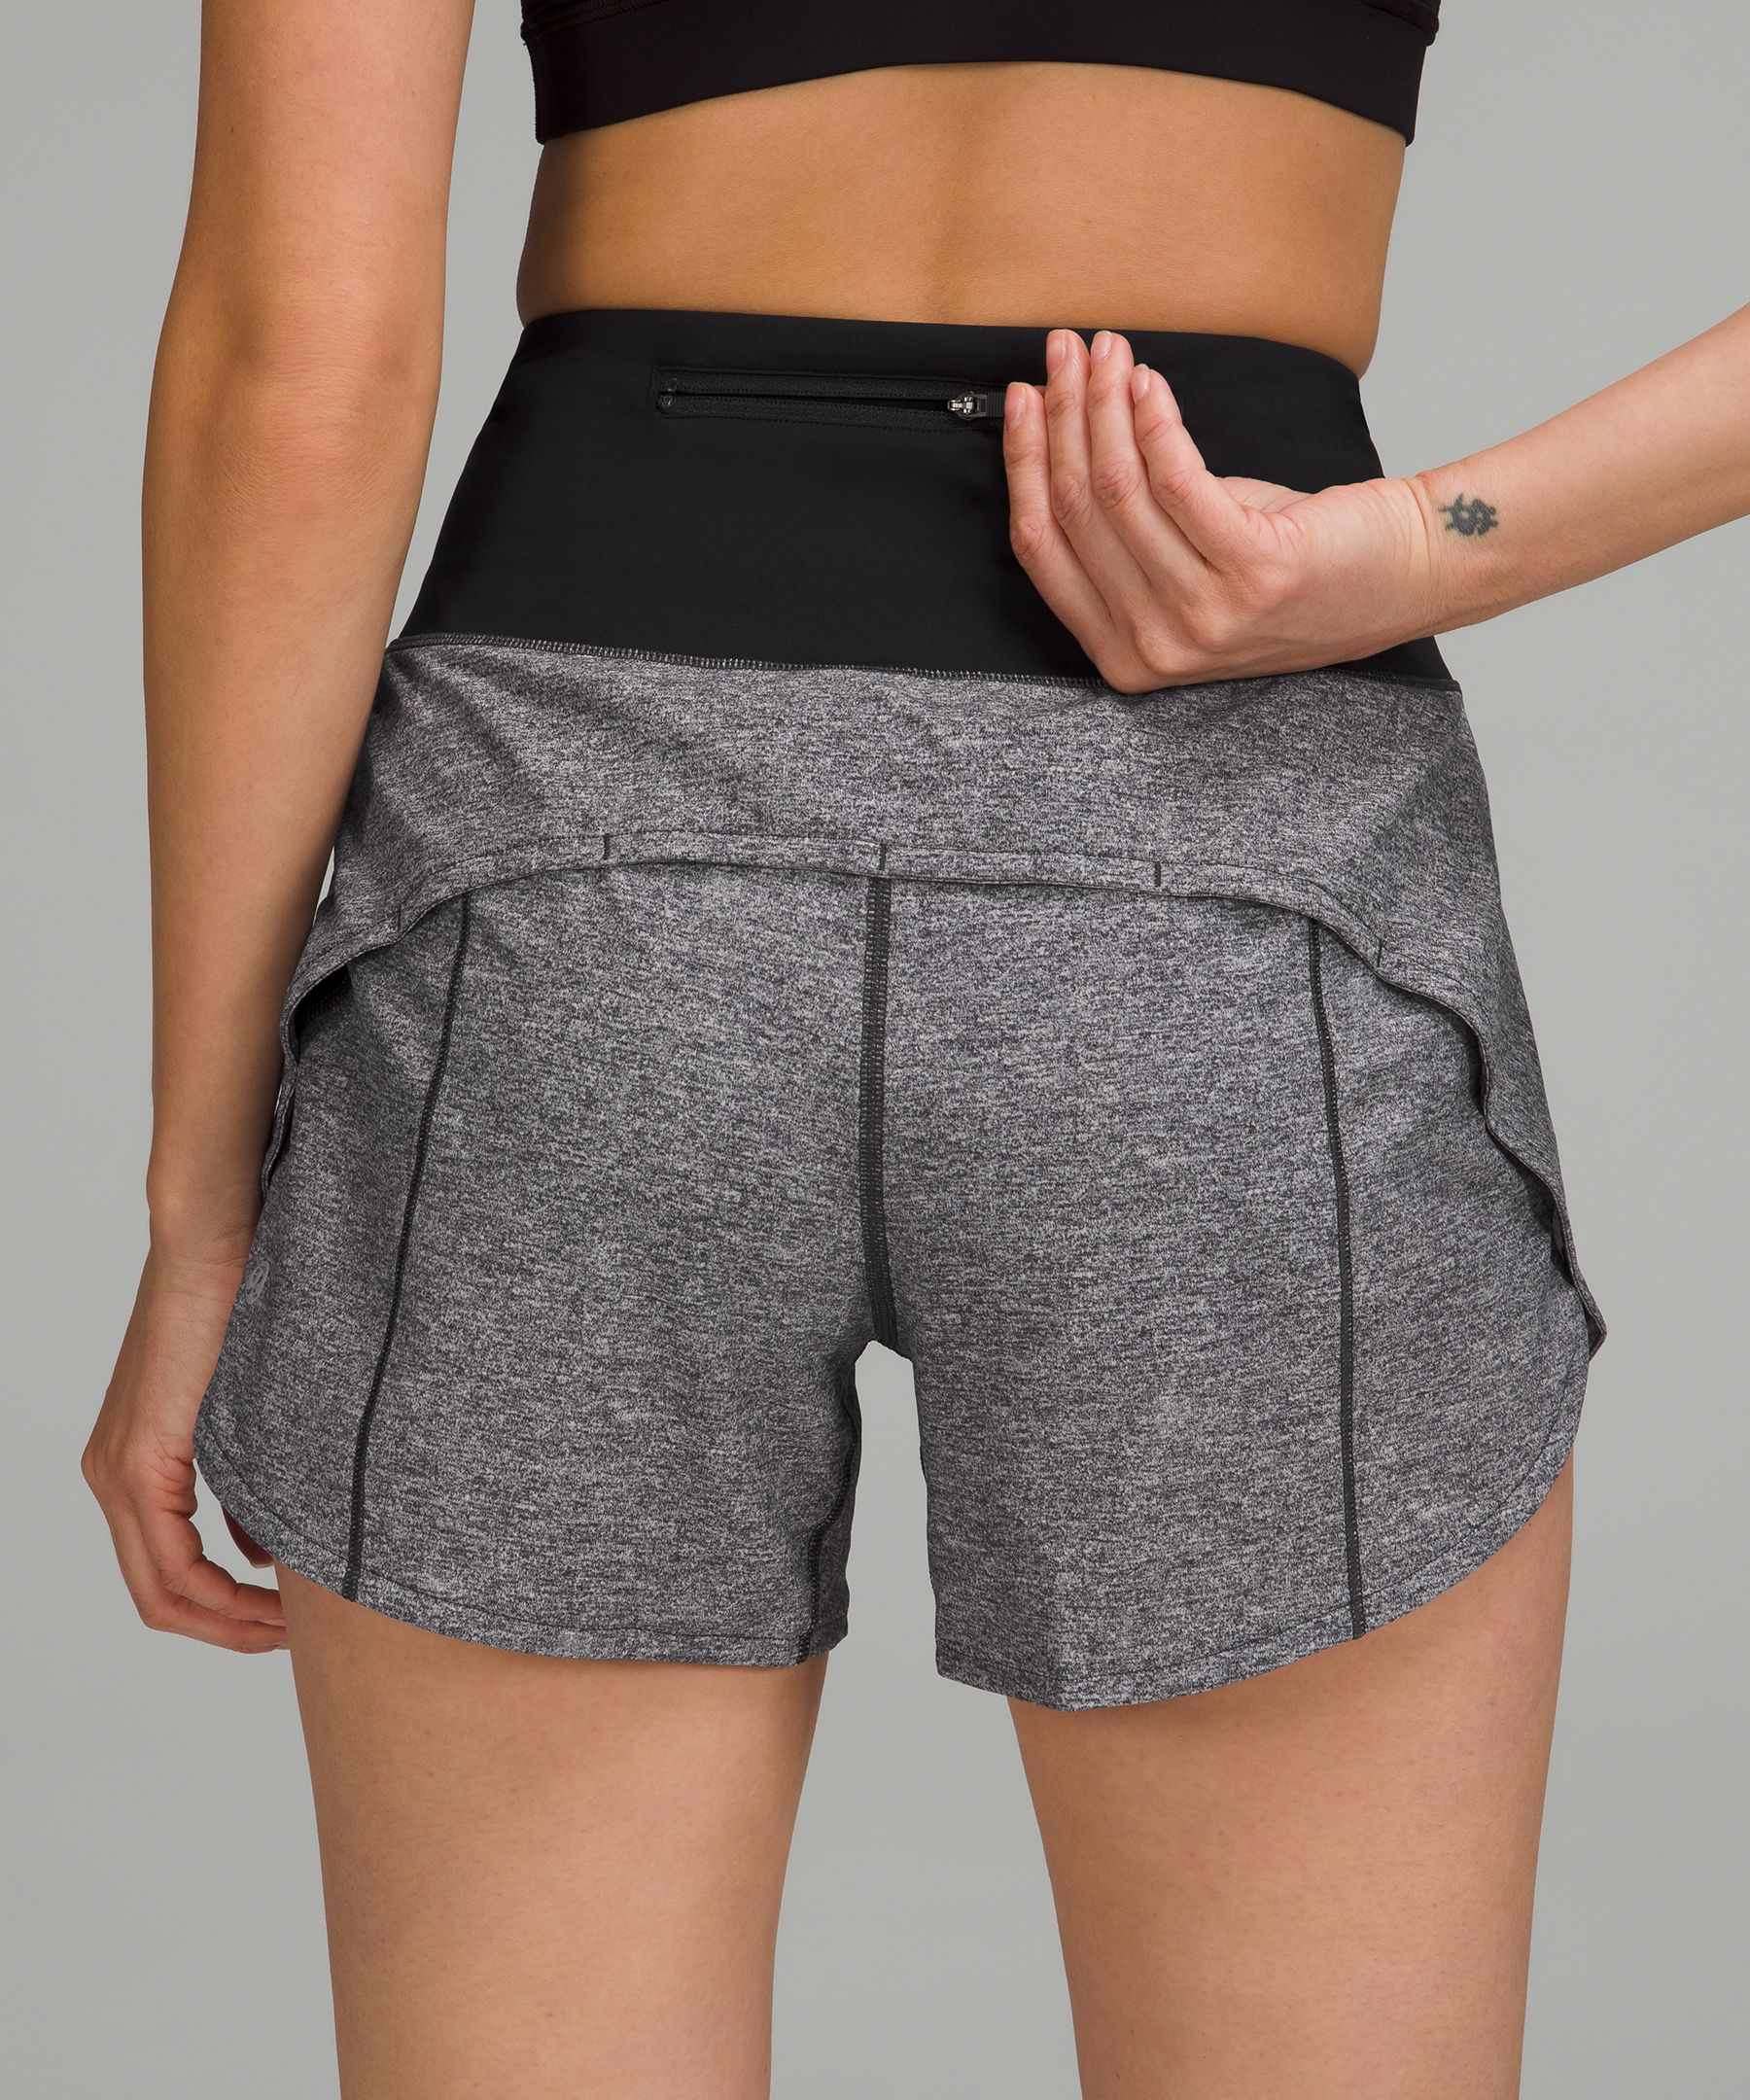 Lululemon SeaWheeze Hotty Hot High-Rise Lined Short 4 - Outer